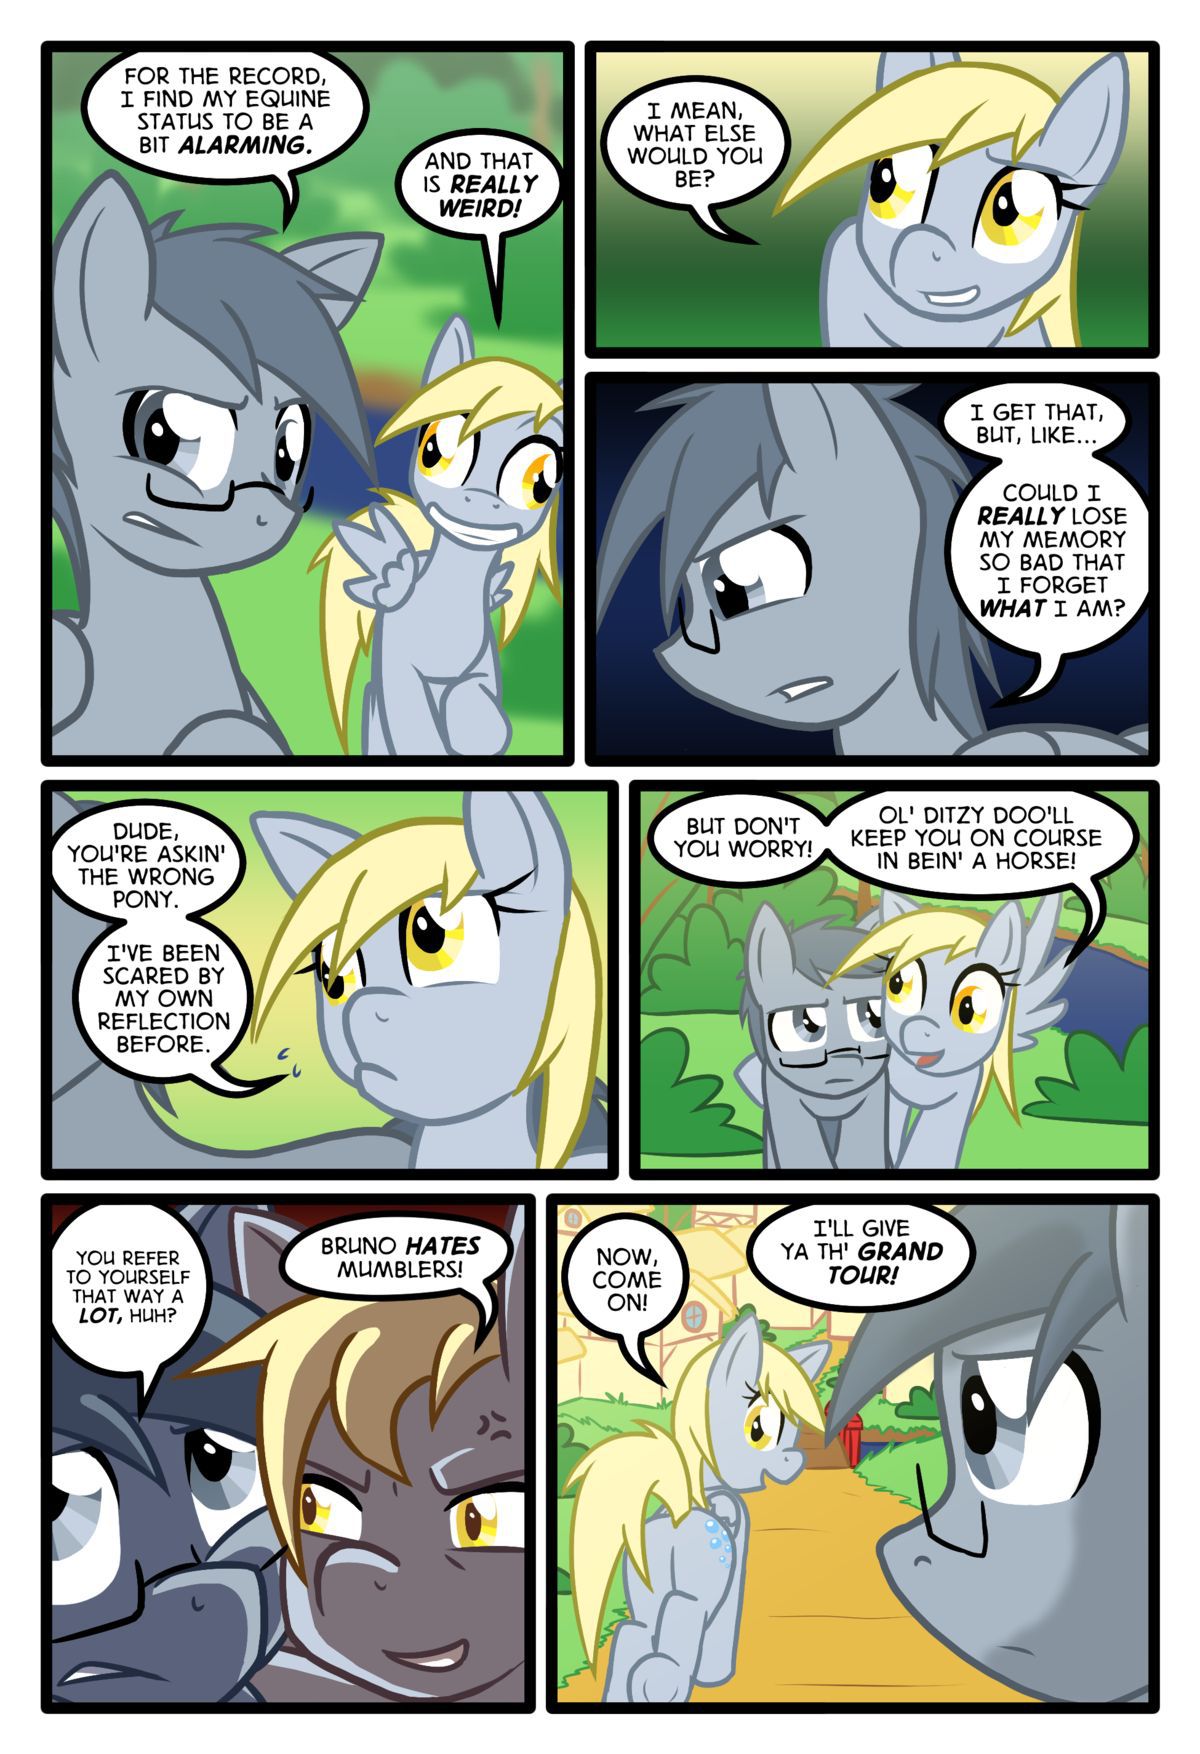 [Zaron] Lonely Hooves (My Little Pony: Friendship is Magic) [English] [Ongoing] 10